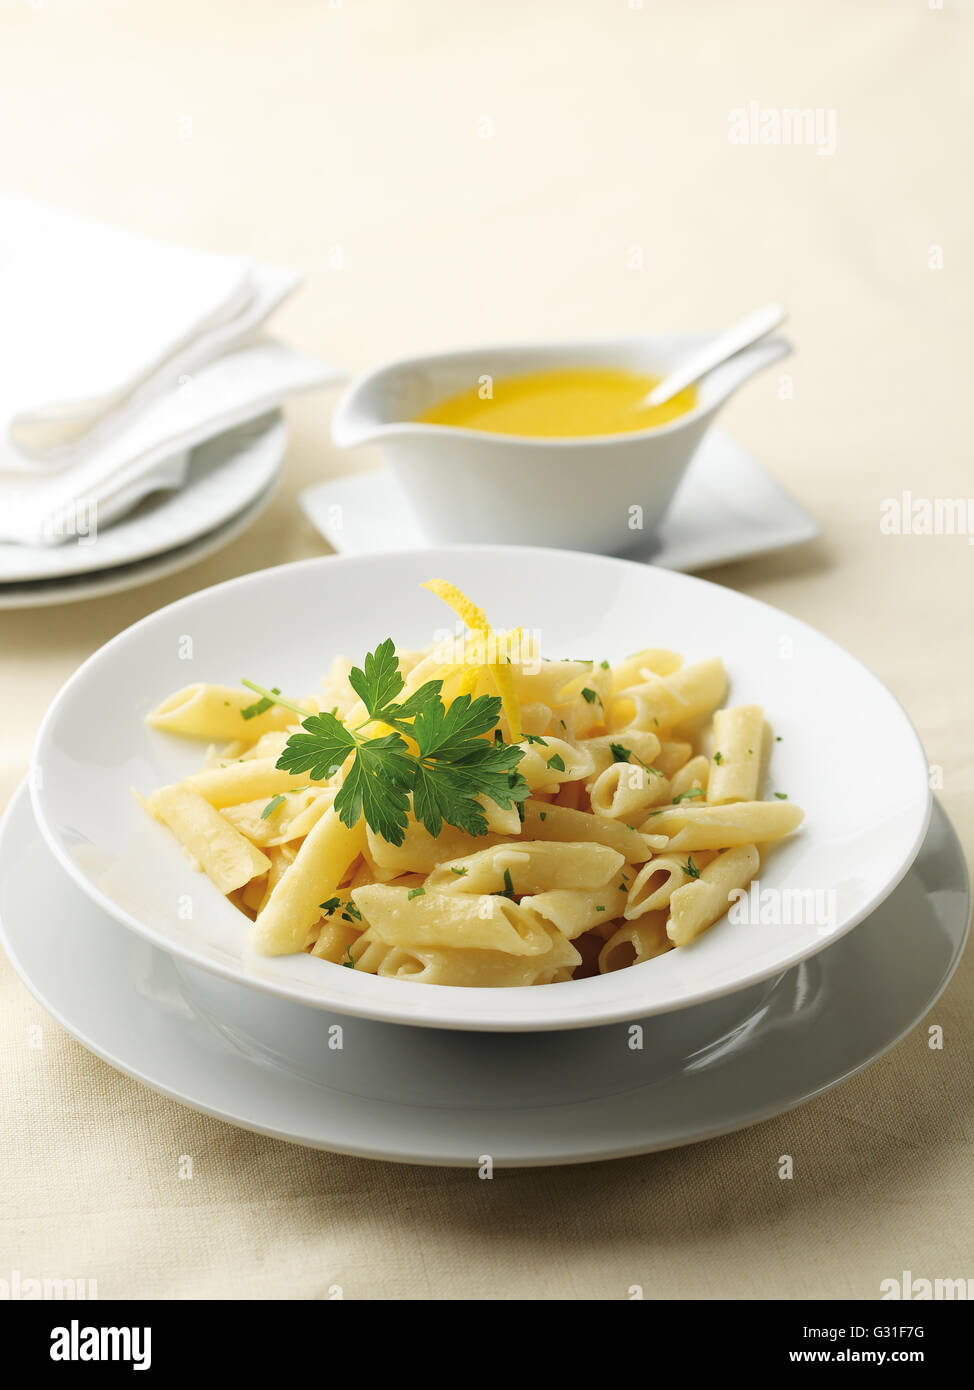 Italian penne pasta served with a butter cream sauce Stock Photo